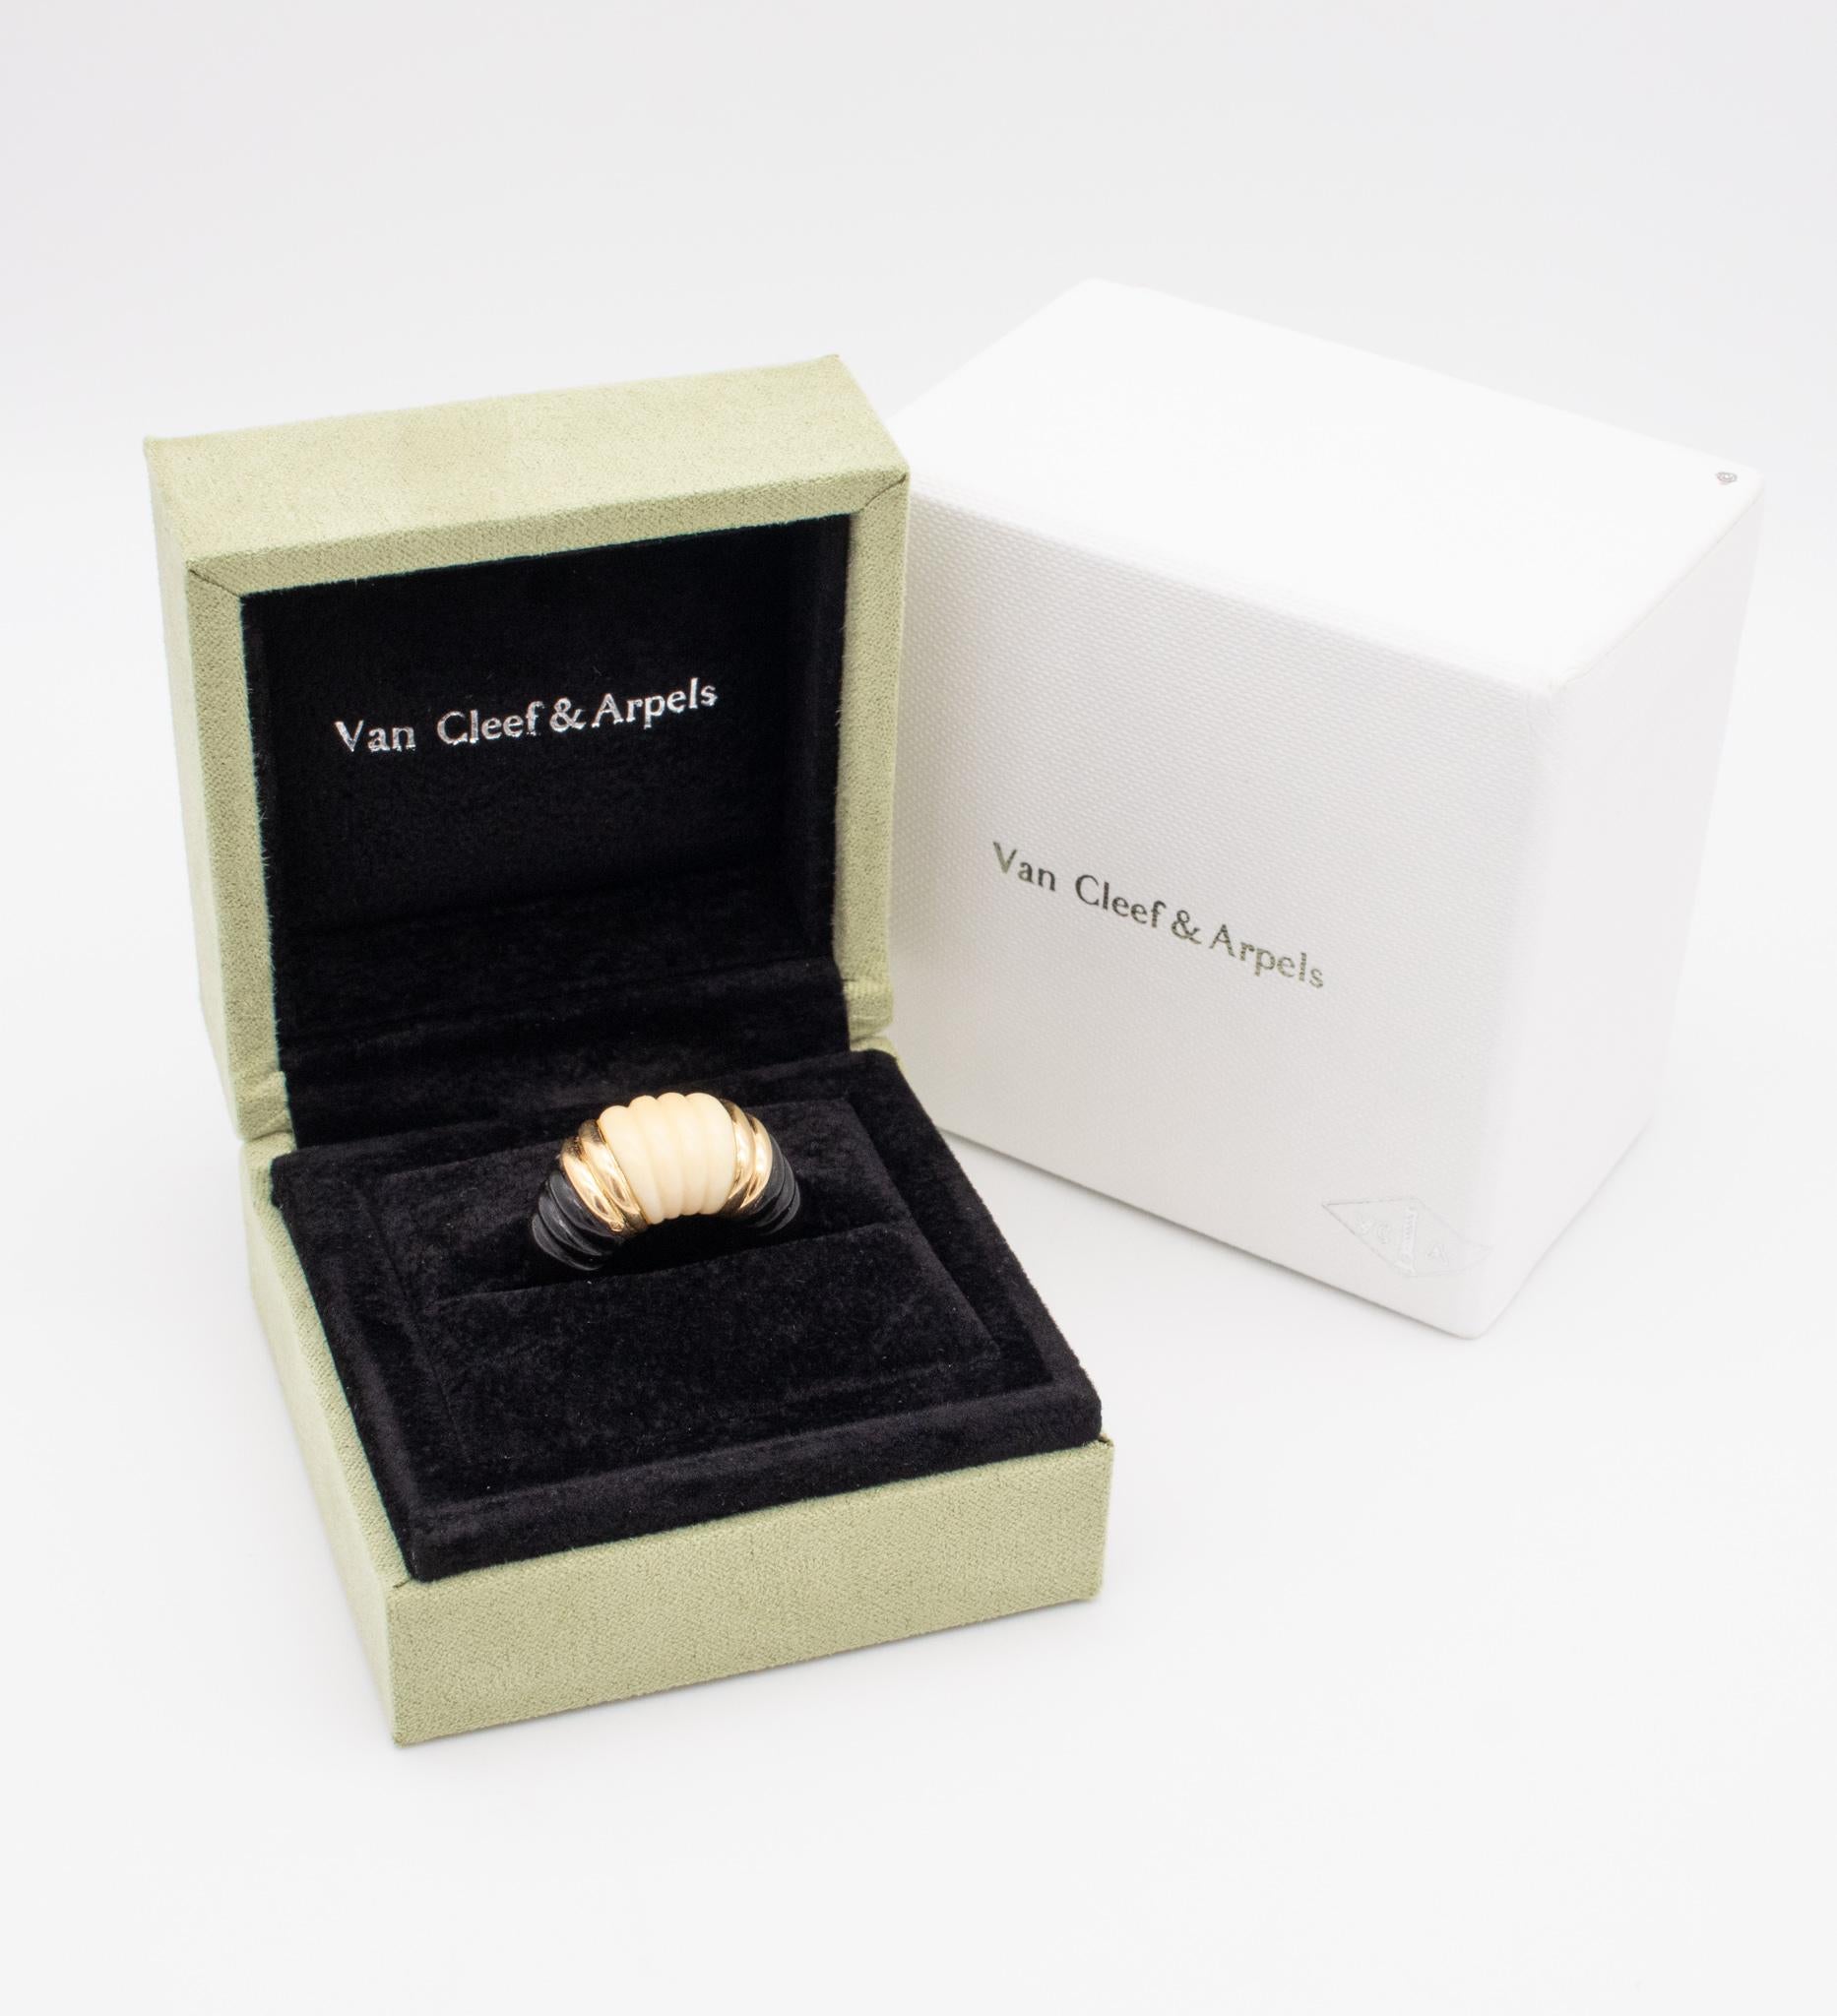 Van Cleef & Arpels 1970 Paris Scalloped Cocktail Ring 18kt Gold with Carvings For Sale 3